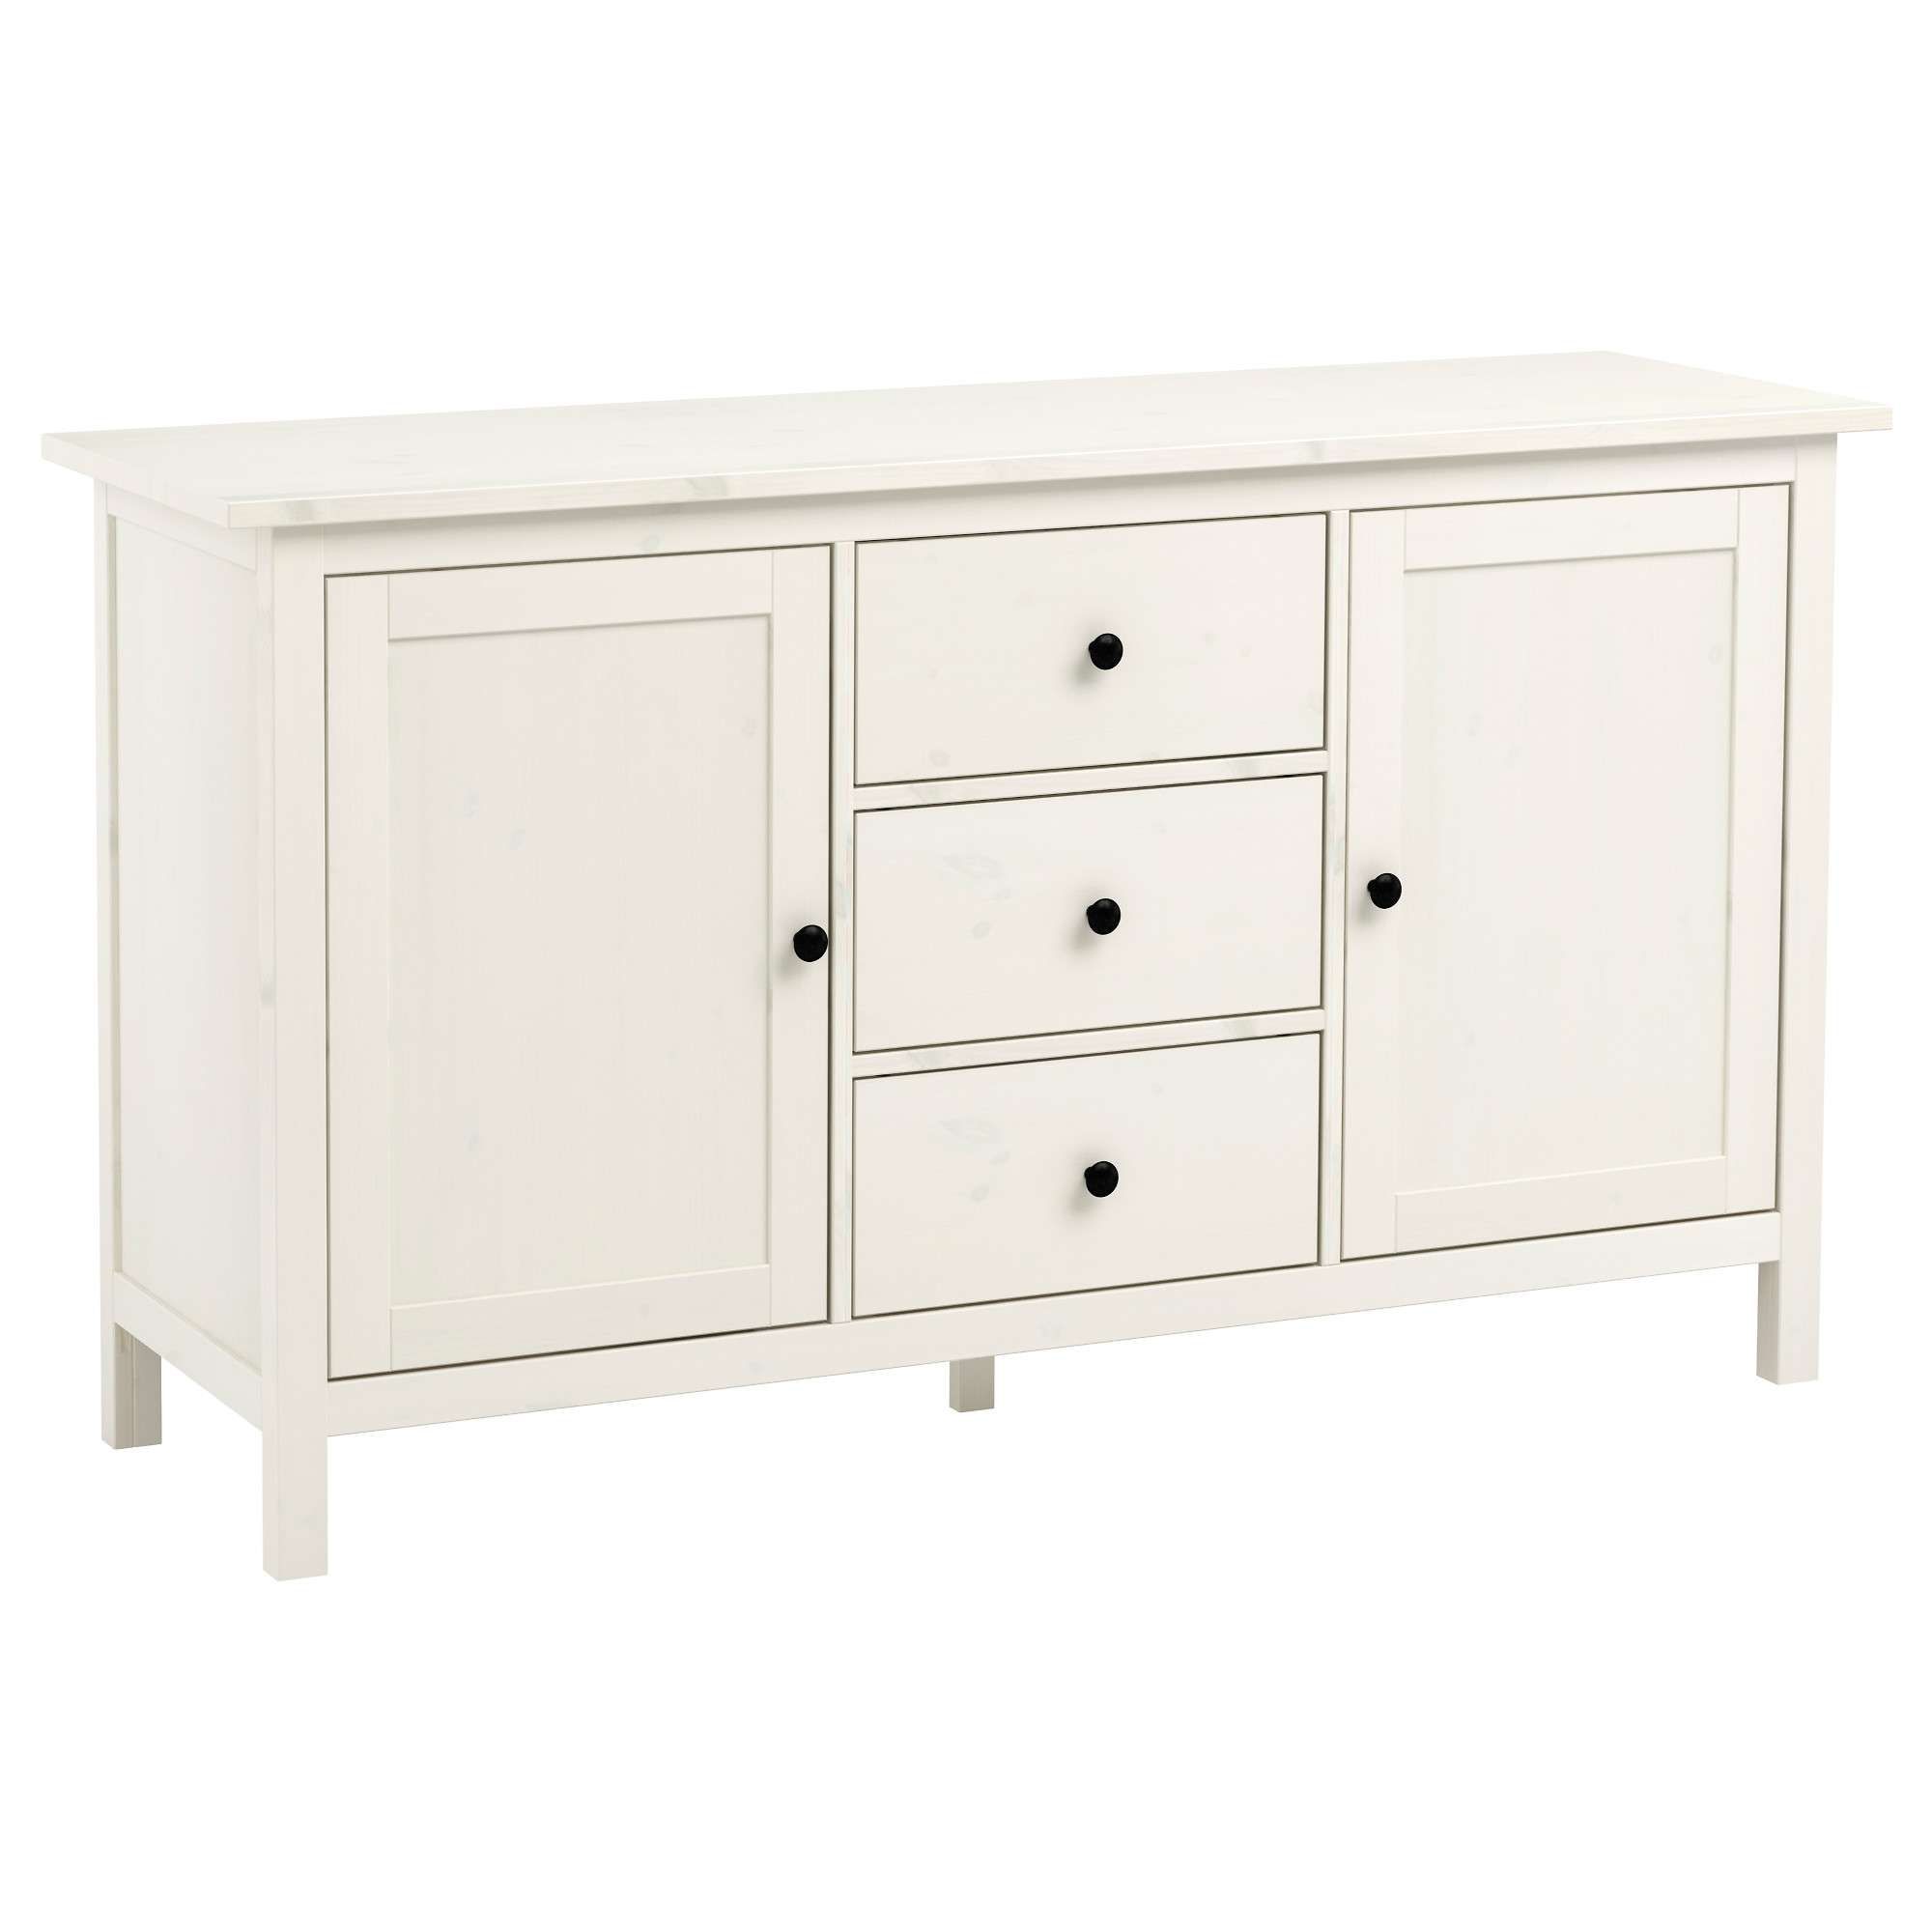 Hemnes Sideboard – White Stain – Ikea In Sideboards With Drawers (View 5 of 20)